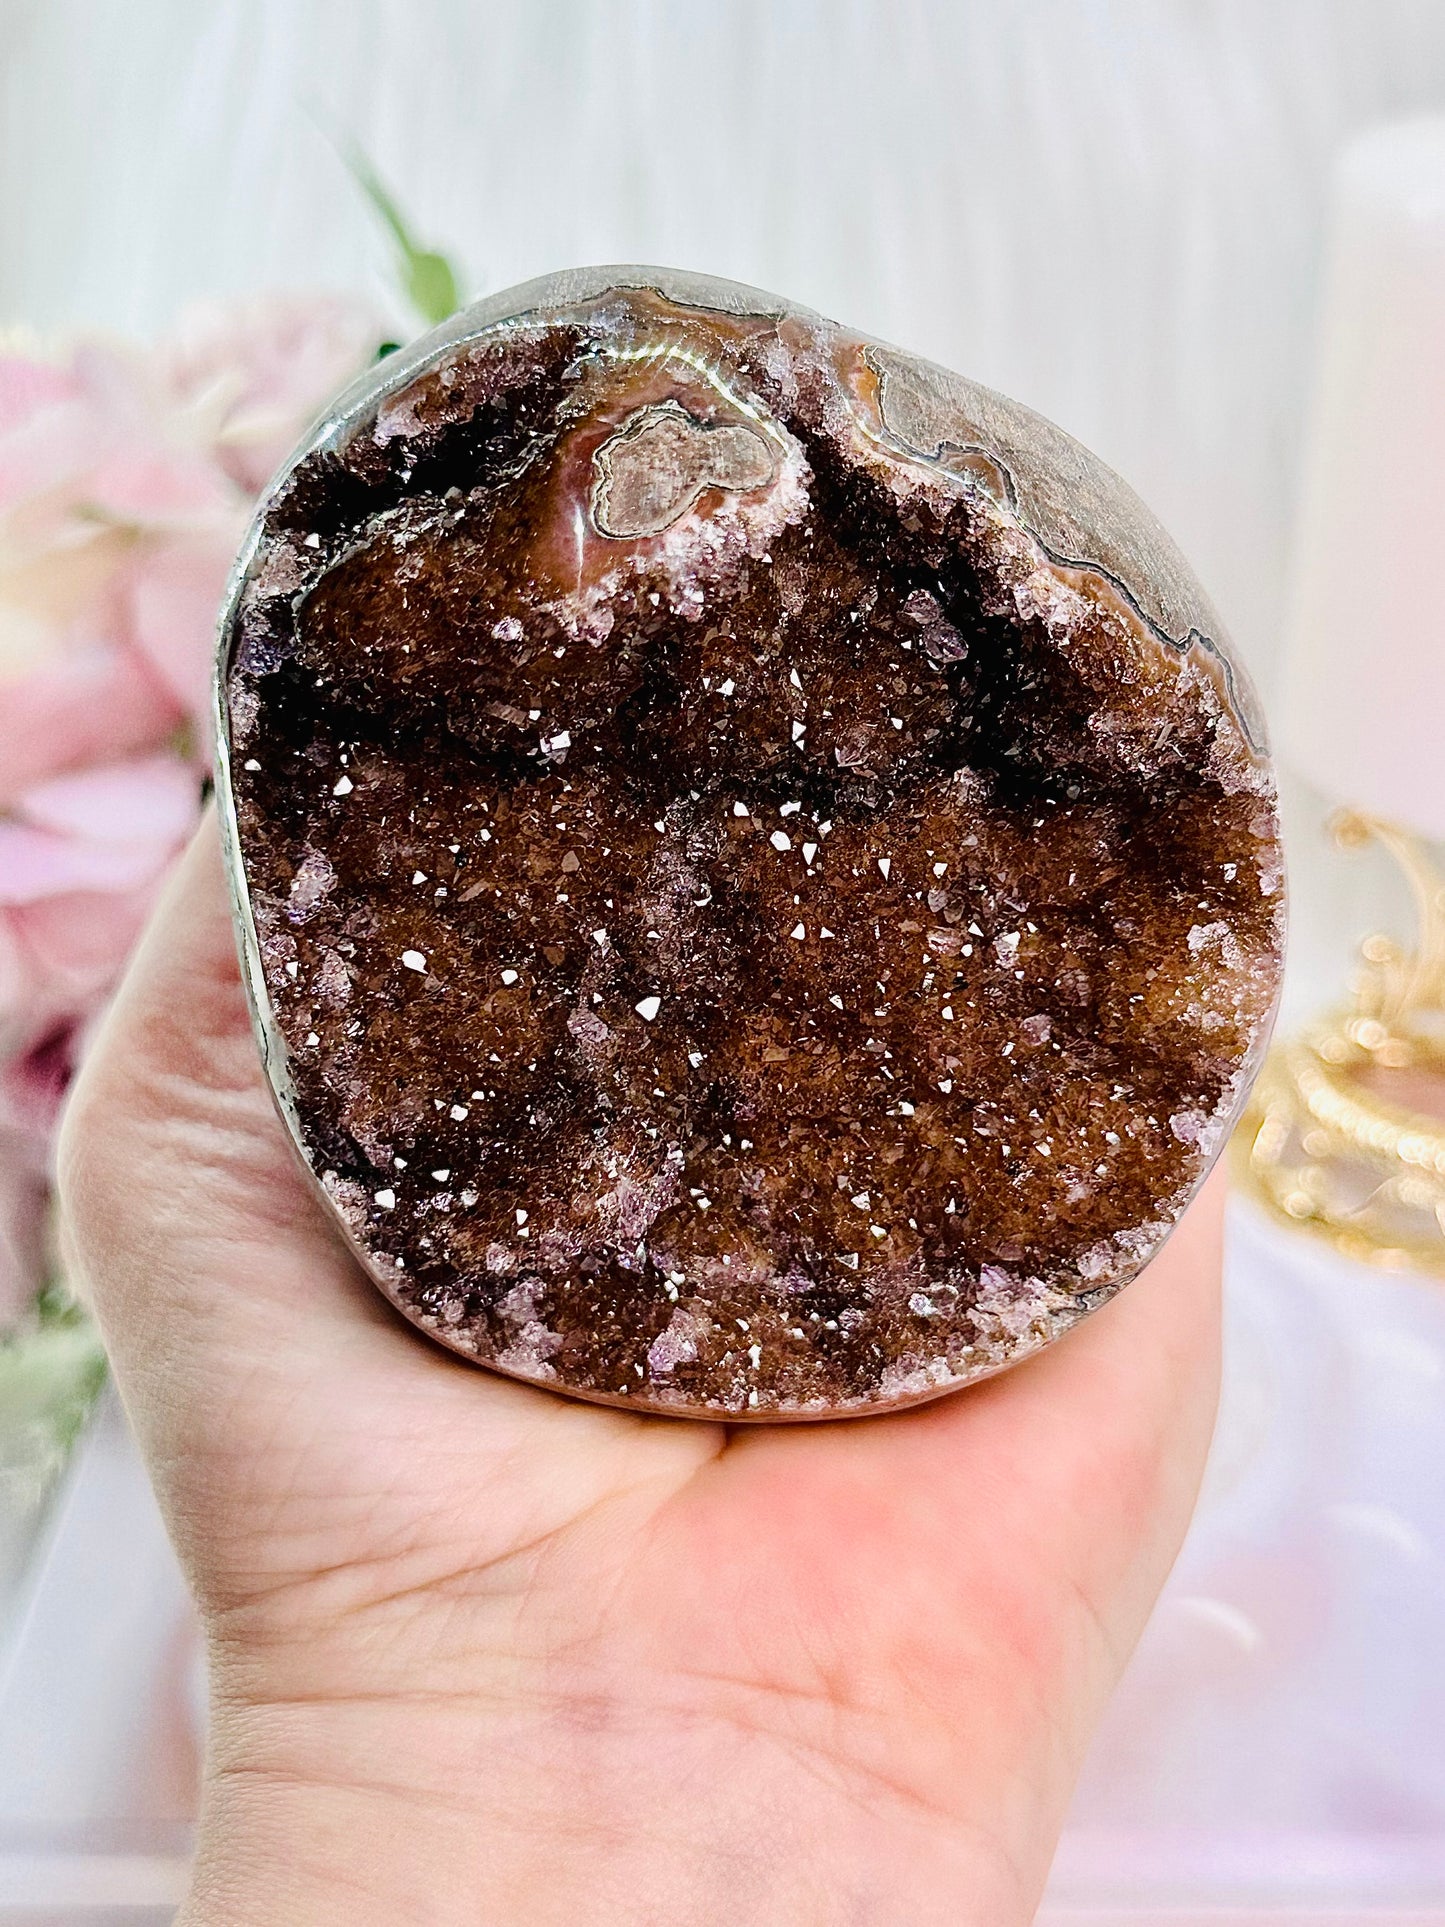 Fabulous Druzy Agate Sparkling Freeform From Uruguay 521grams